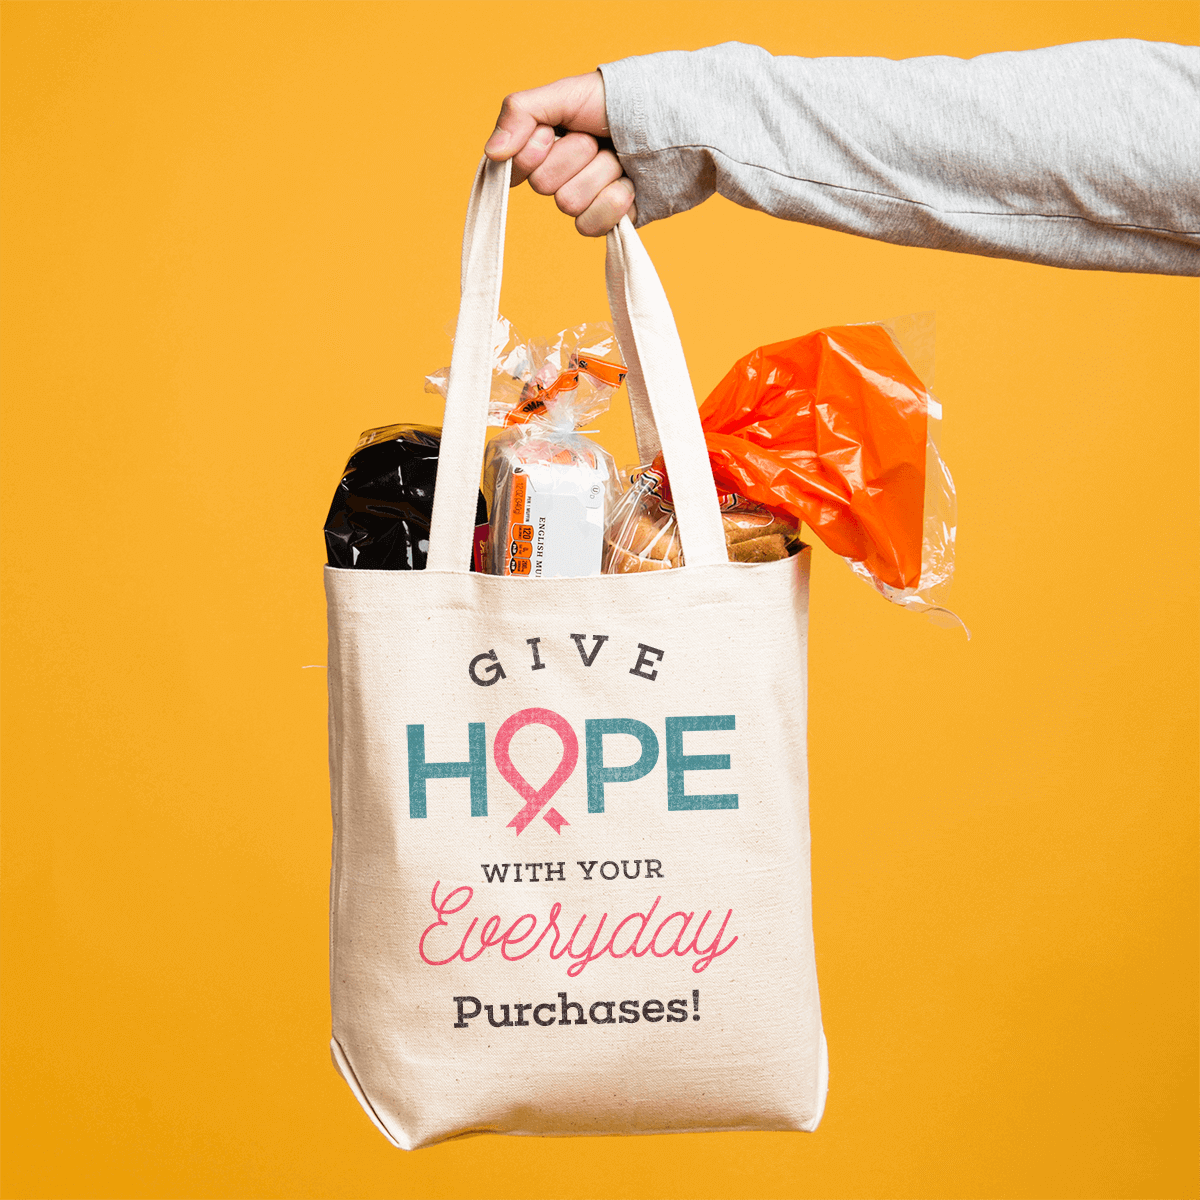 Easy ways to give while shopping: Give hope with your every day purchases